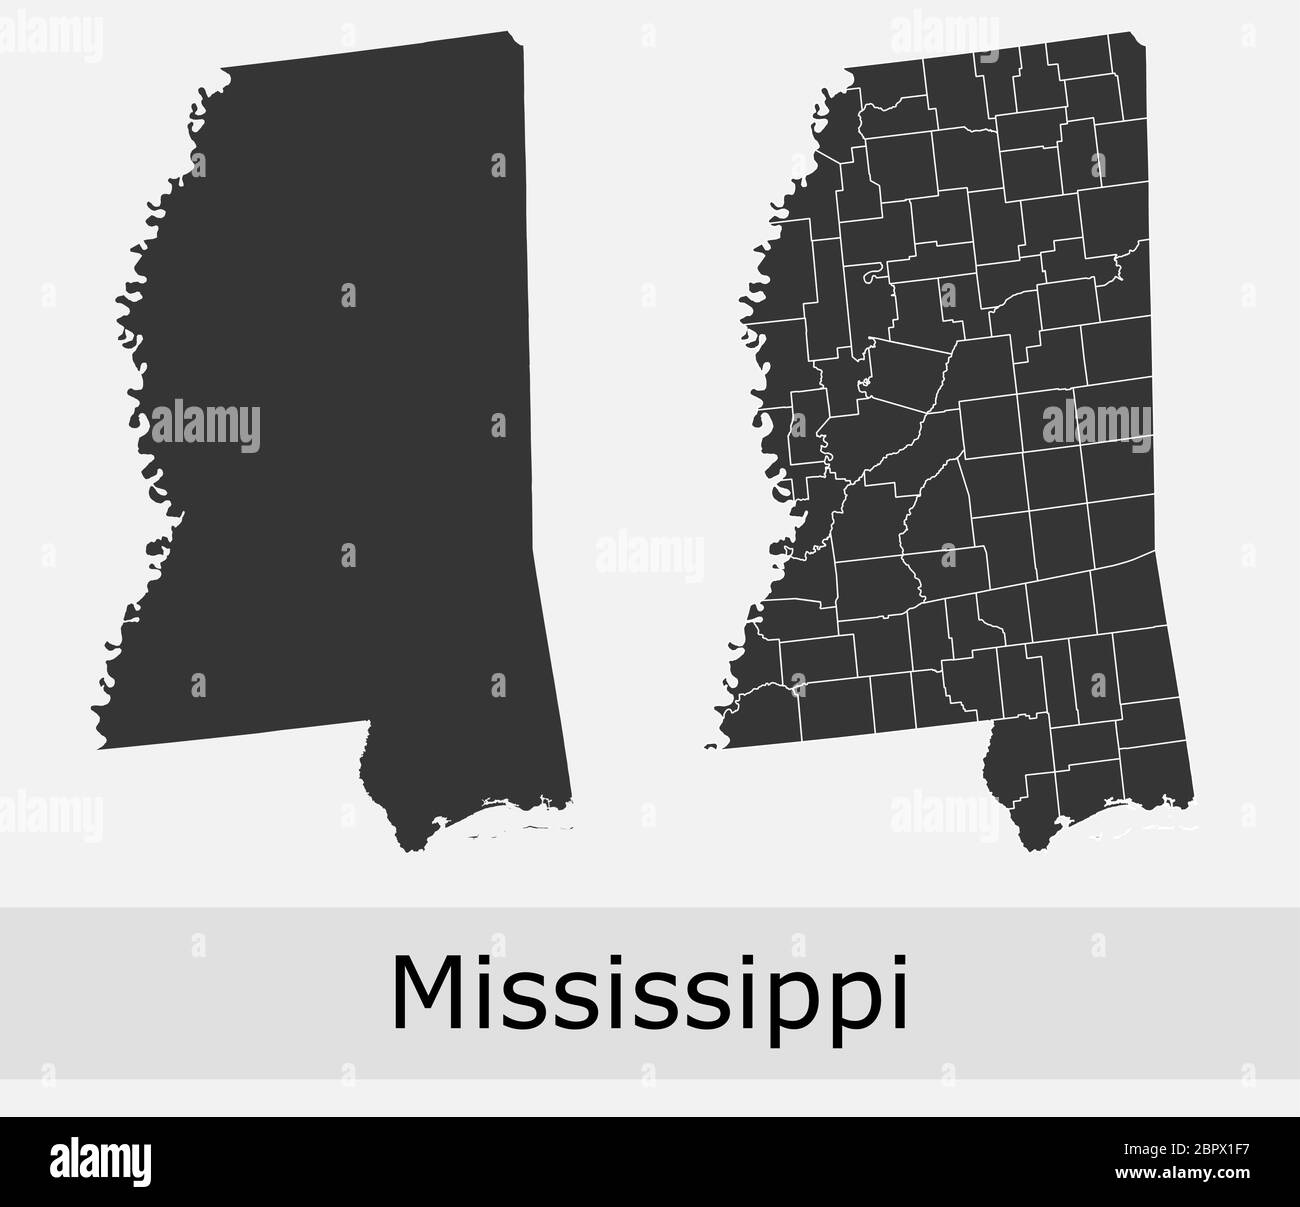 Mississippi maps vector outline counties, townships, regions, municipalities, departments, borders Stock Vector